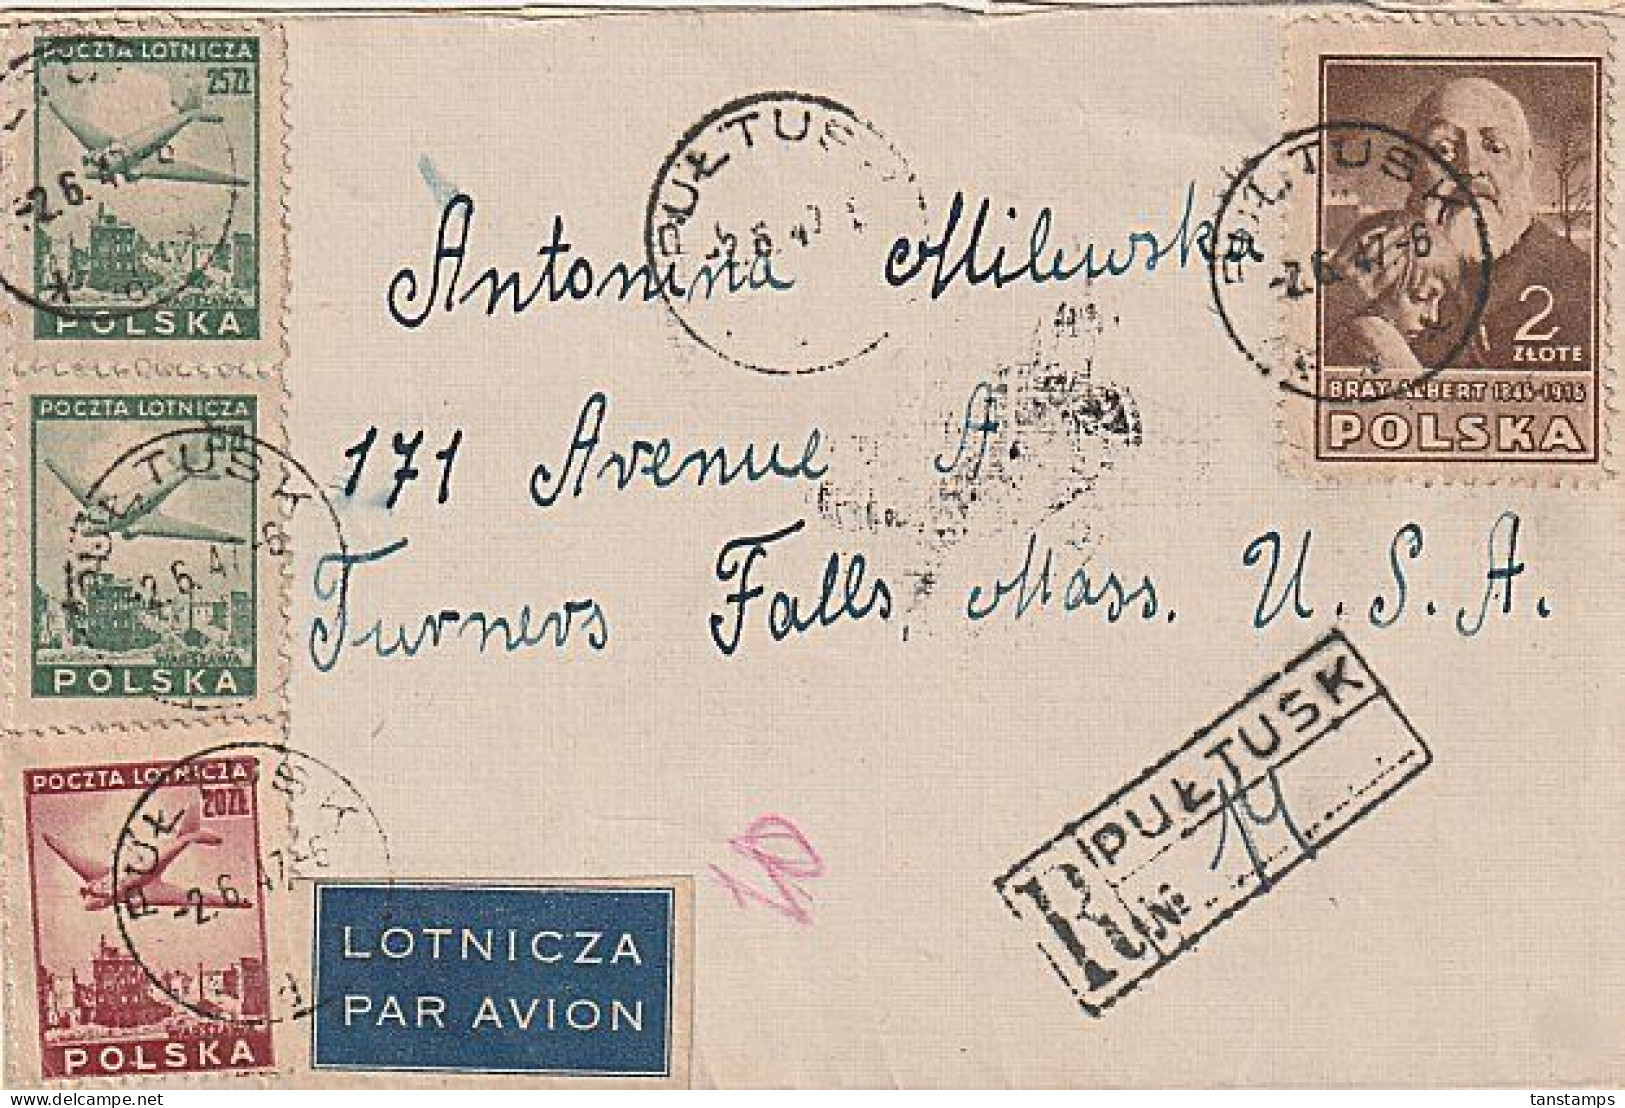 POLAND - USA REGISTERED PULTUSK AIRMAIL COVER - Avions